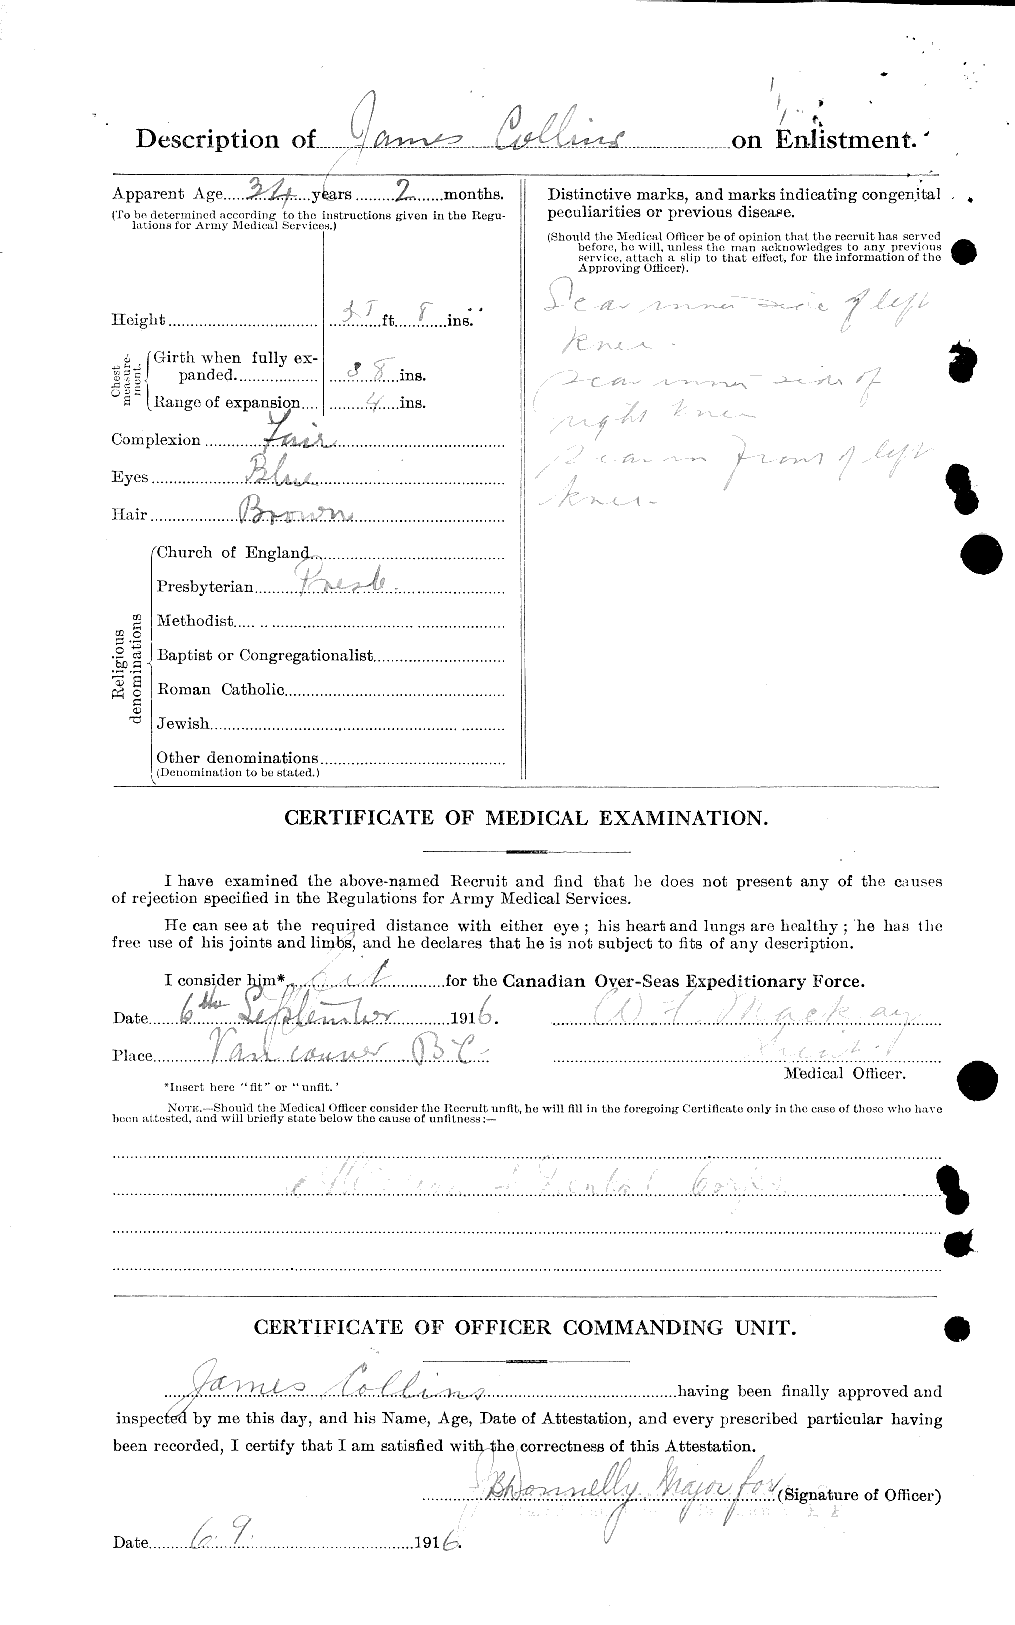 Personnel Records of the First World War - CEF 037917b